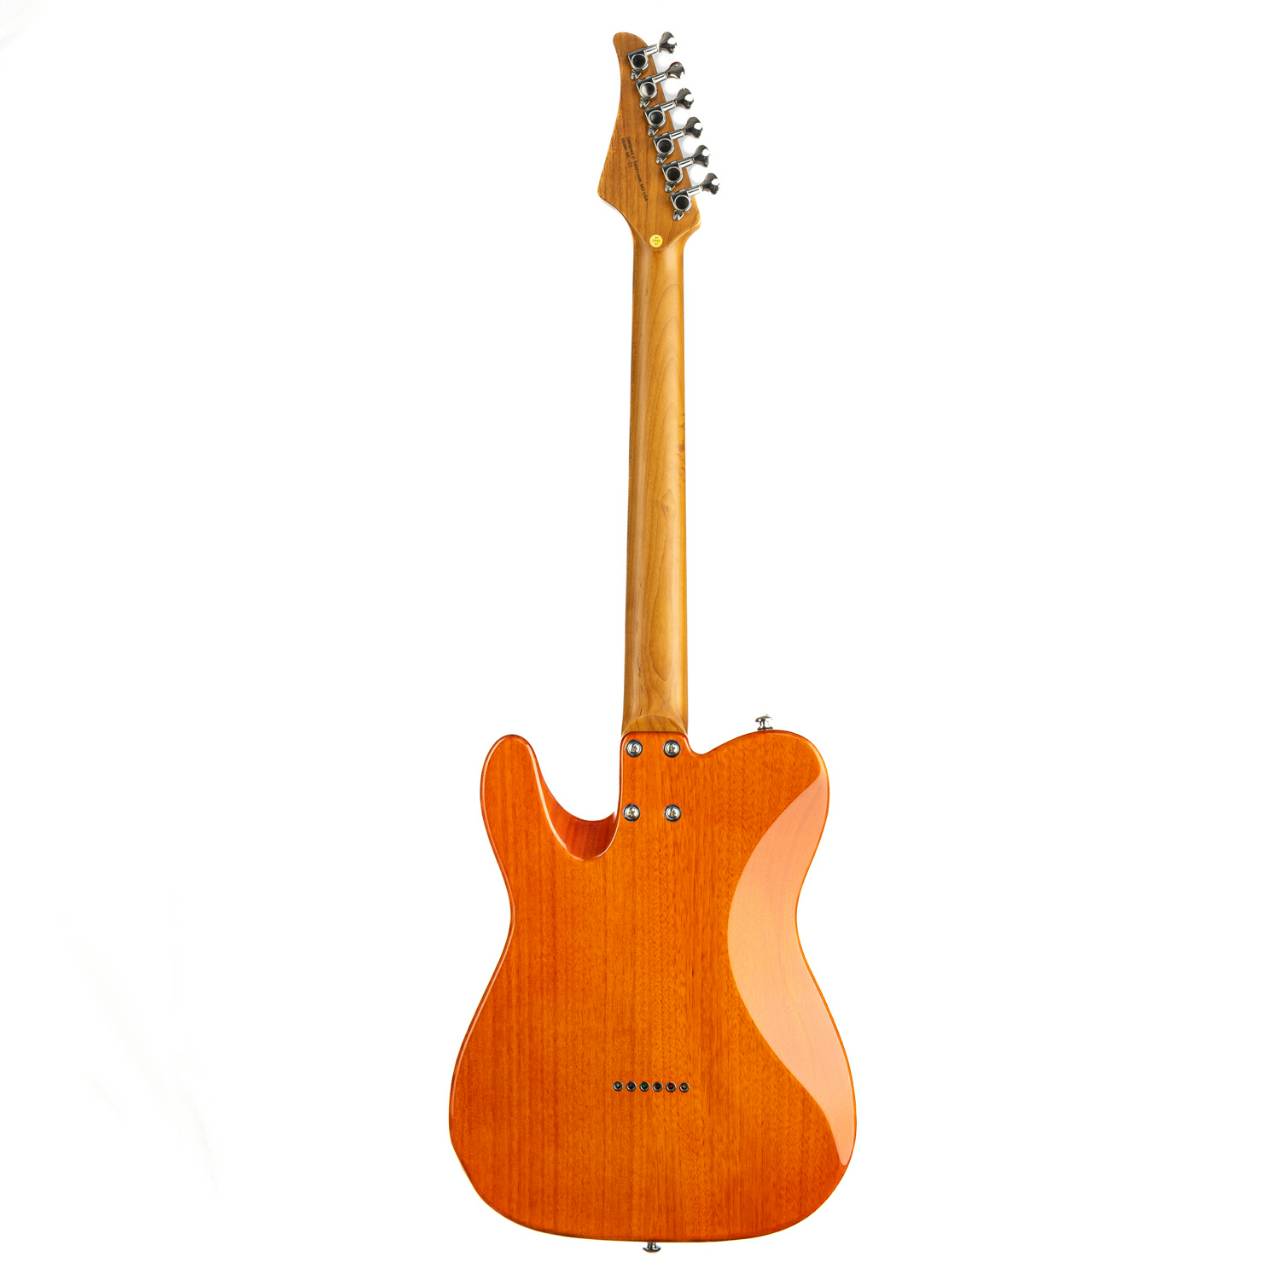 Eart Guitars, NK-C1(N), Single Coil Pickups, Roasted Bookmatch Mahogany+Flame Maple Body, Orange